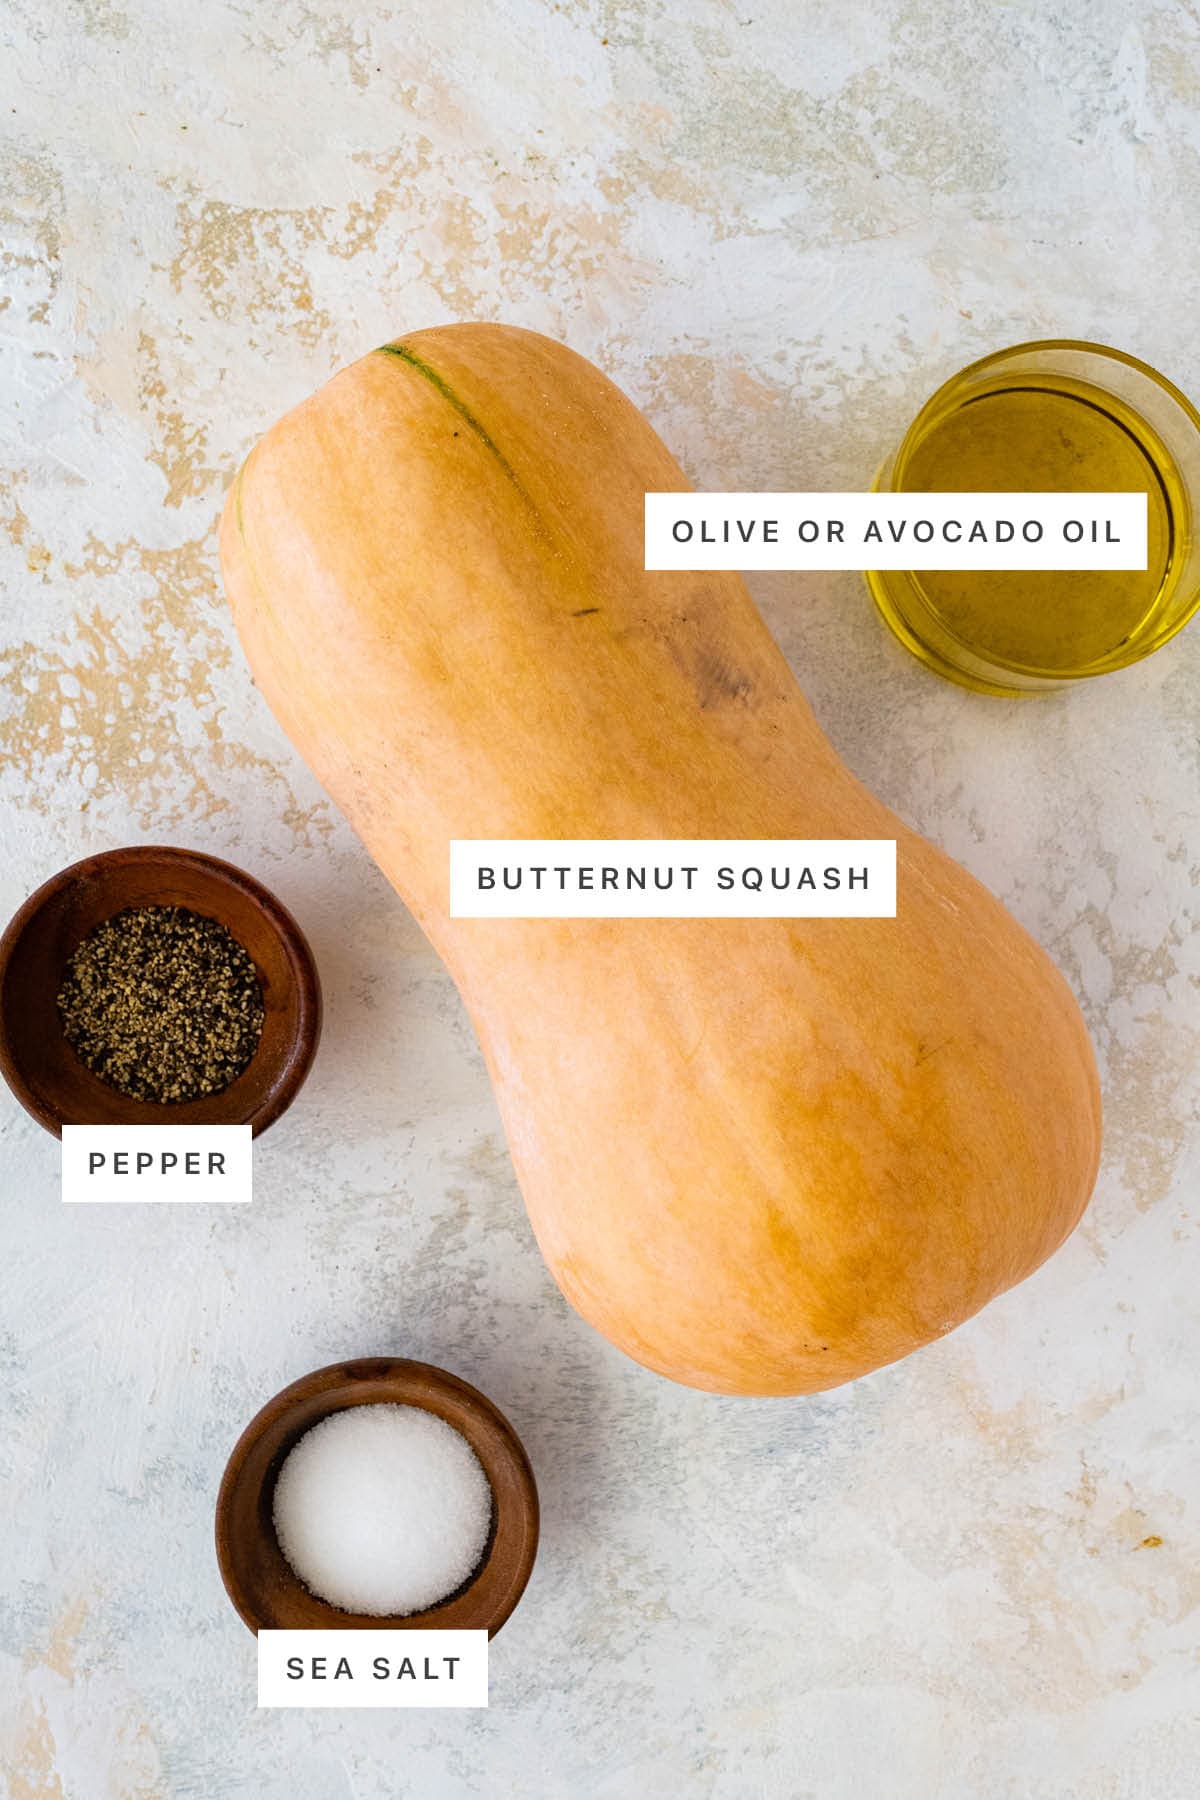 Ingredients measured out to make Air Fryer Butternut Squash: olive oil, butternut squash, pepper and sea salt.